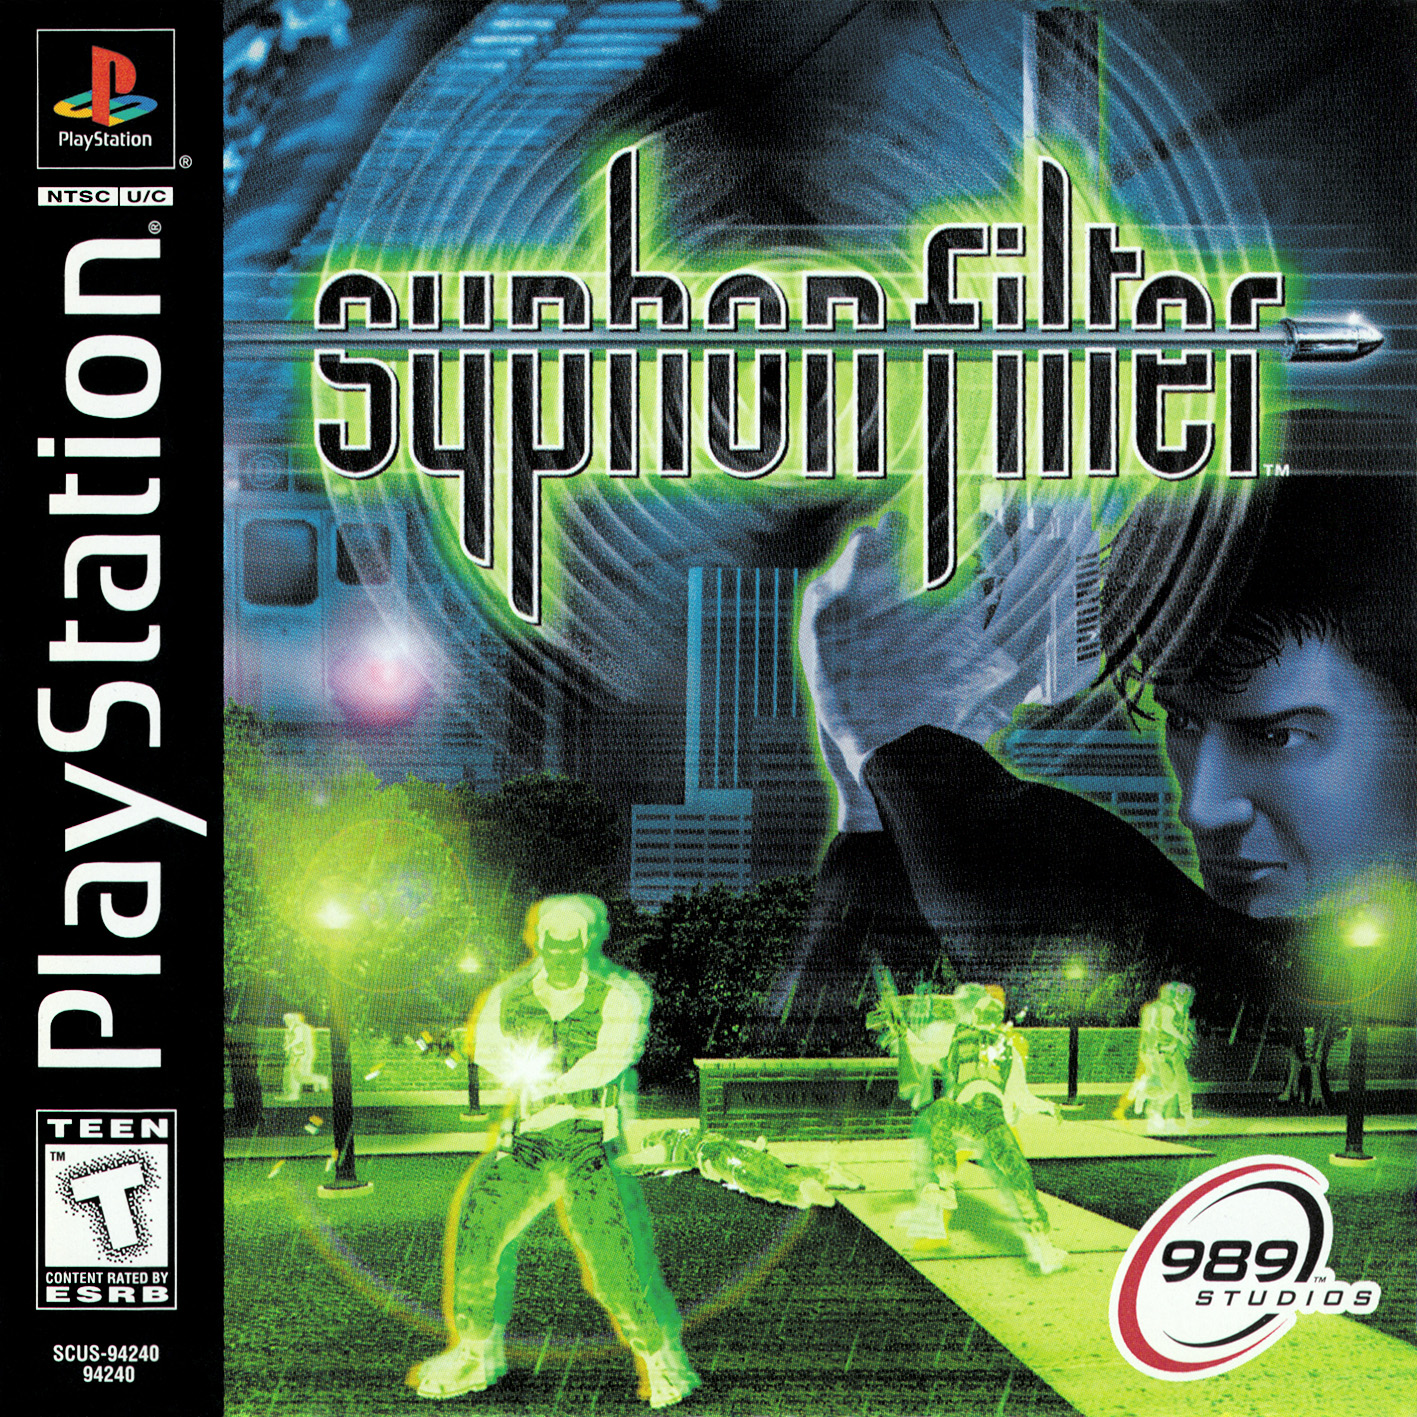 Operation Canyon Storm, Syphon Filter Wiki